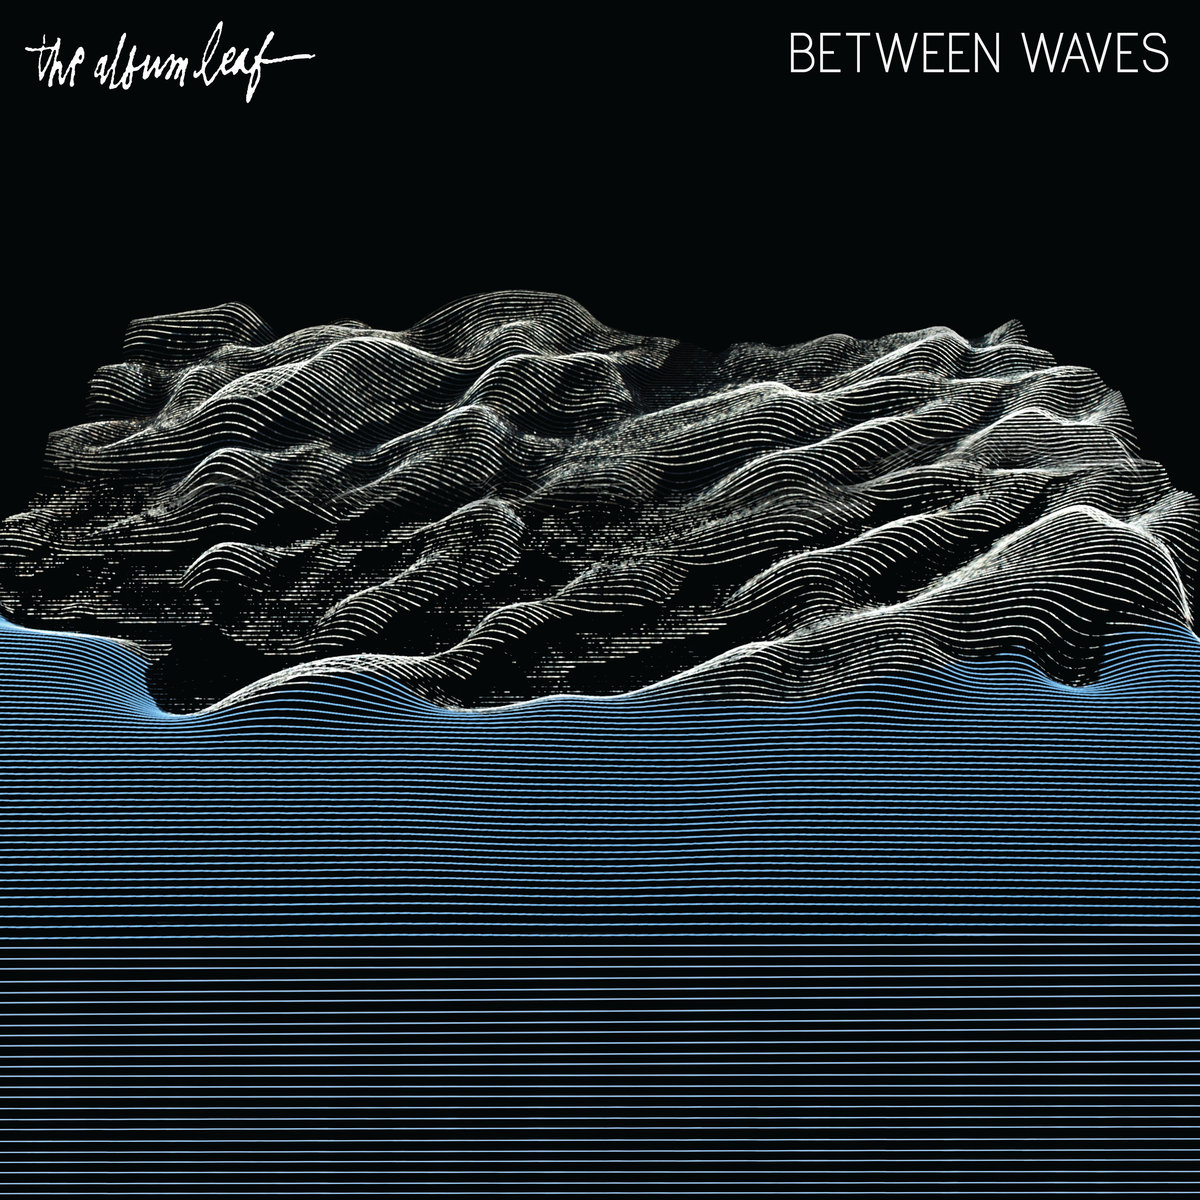 'Between Waves' by The Album Leaf album review by Matthew Wardell.